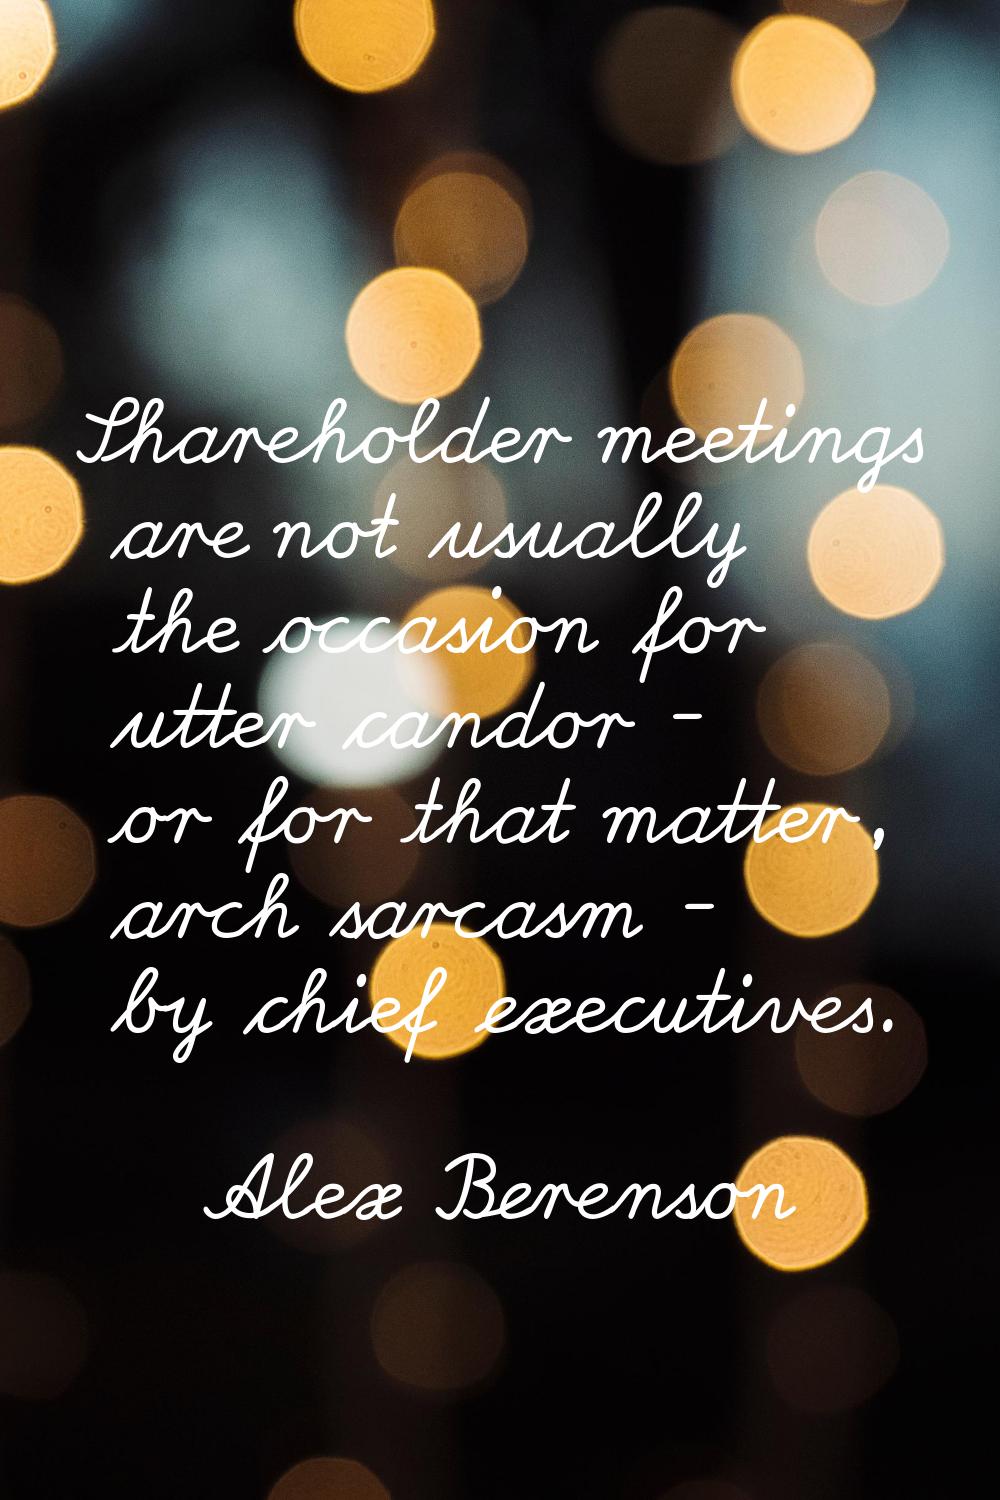 Shareholder meetings are not usually the occasion for utter candor - or for that matter, arch sarca